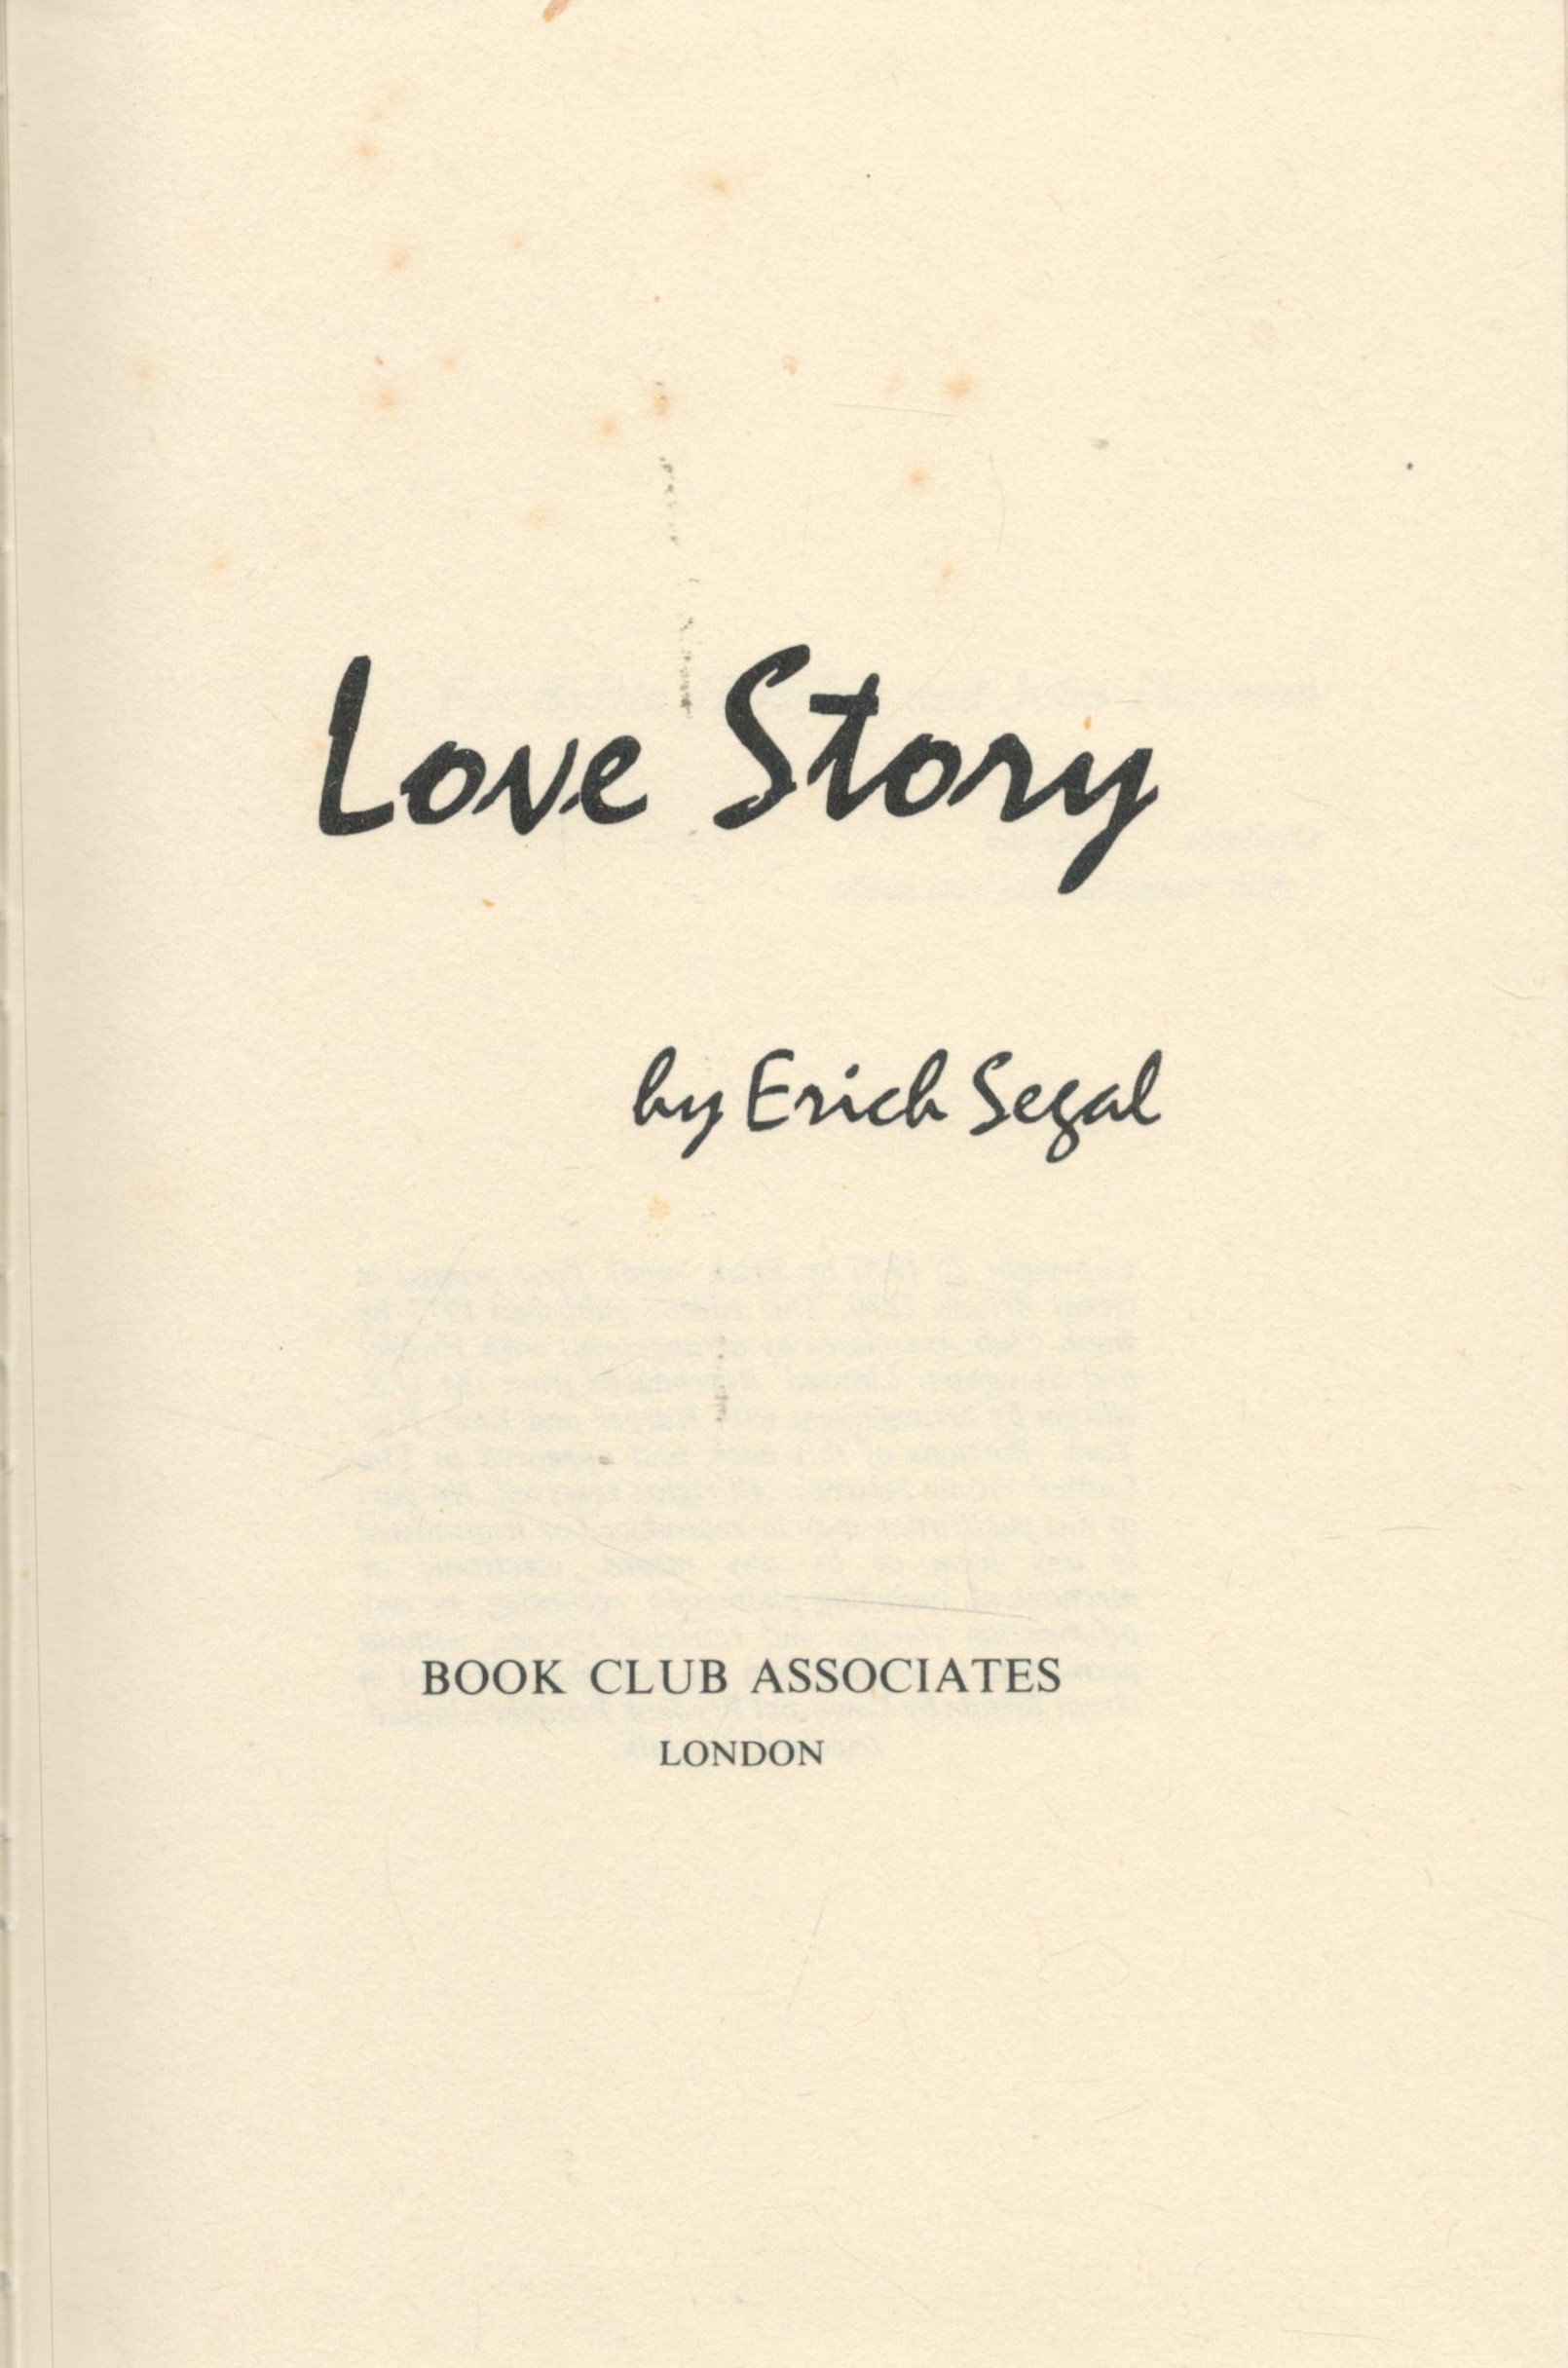 Love Story by Erich Segal 1977 Book Club Associates Edition Hardback Book with 131 pages published - Image 2 of 3